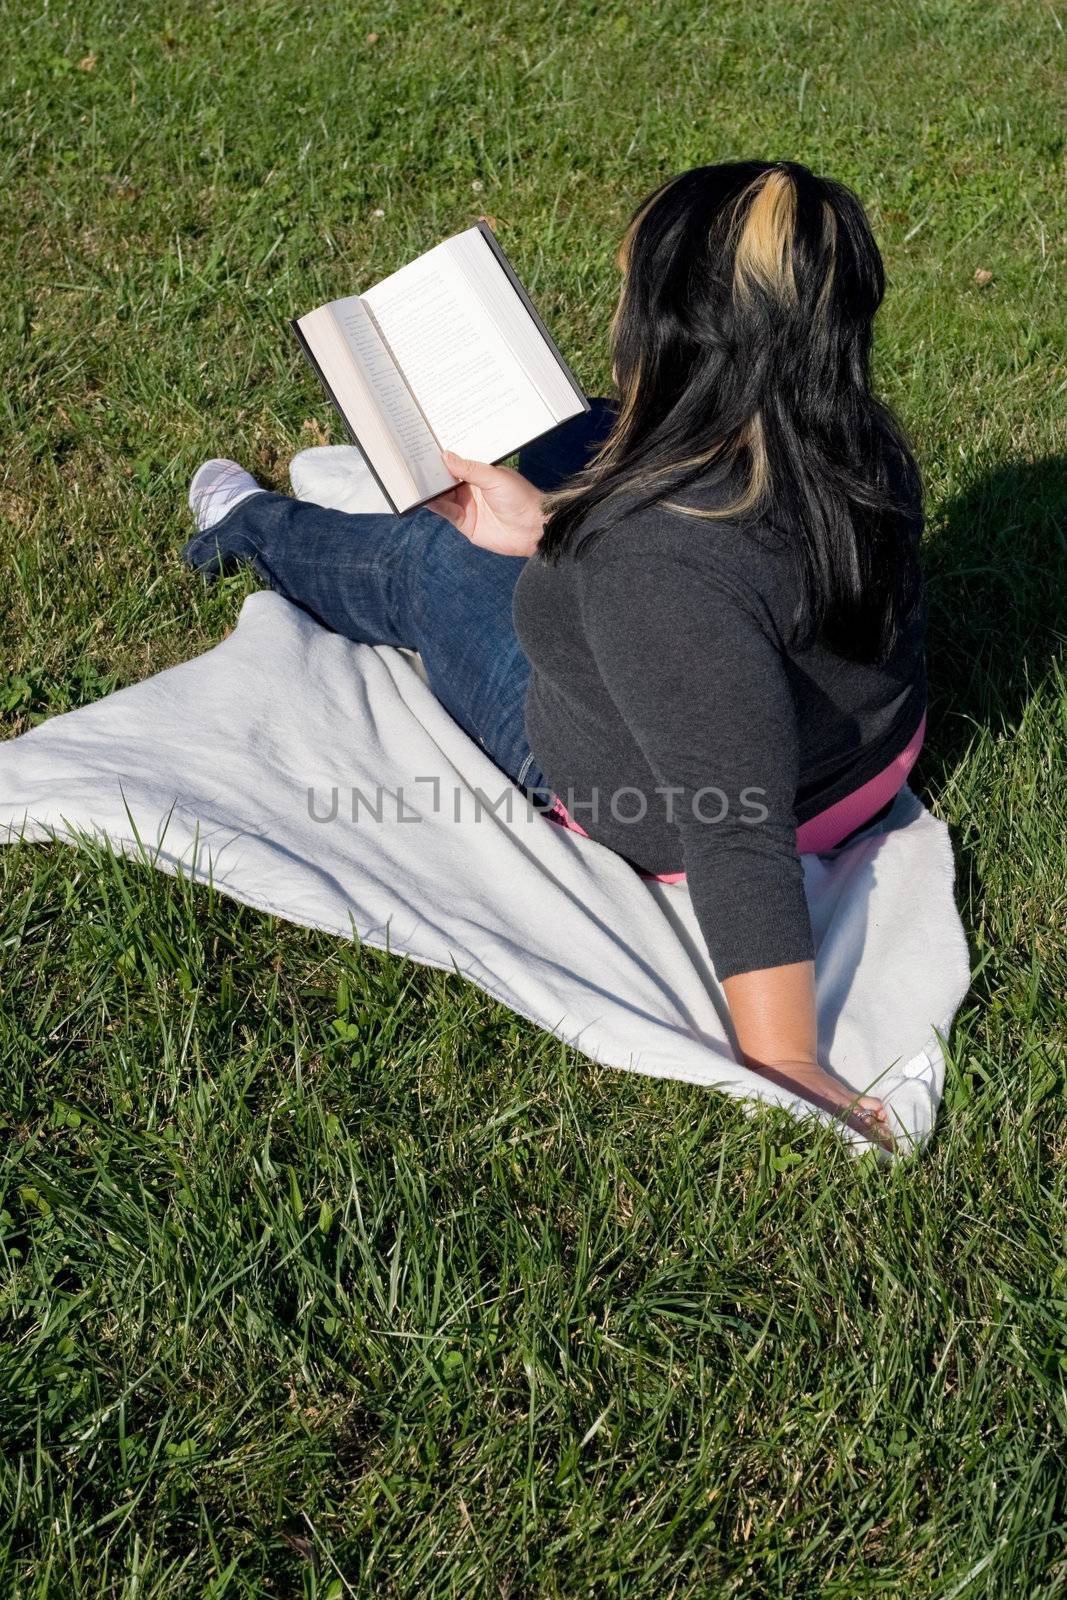 A young woman with highlighted hair reading a book on the school campus.